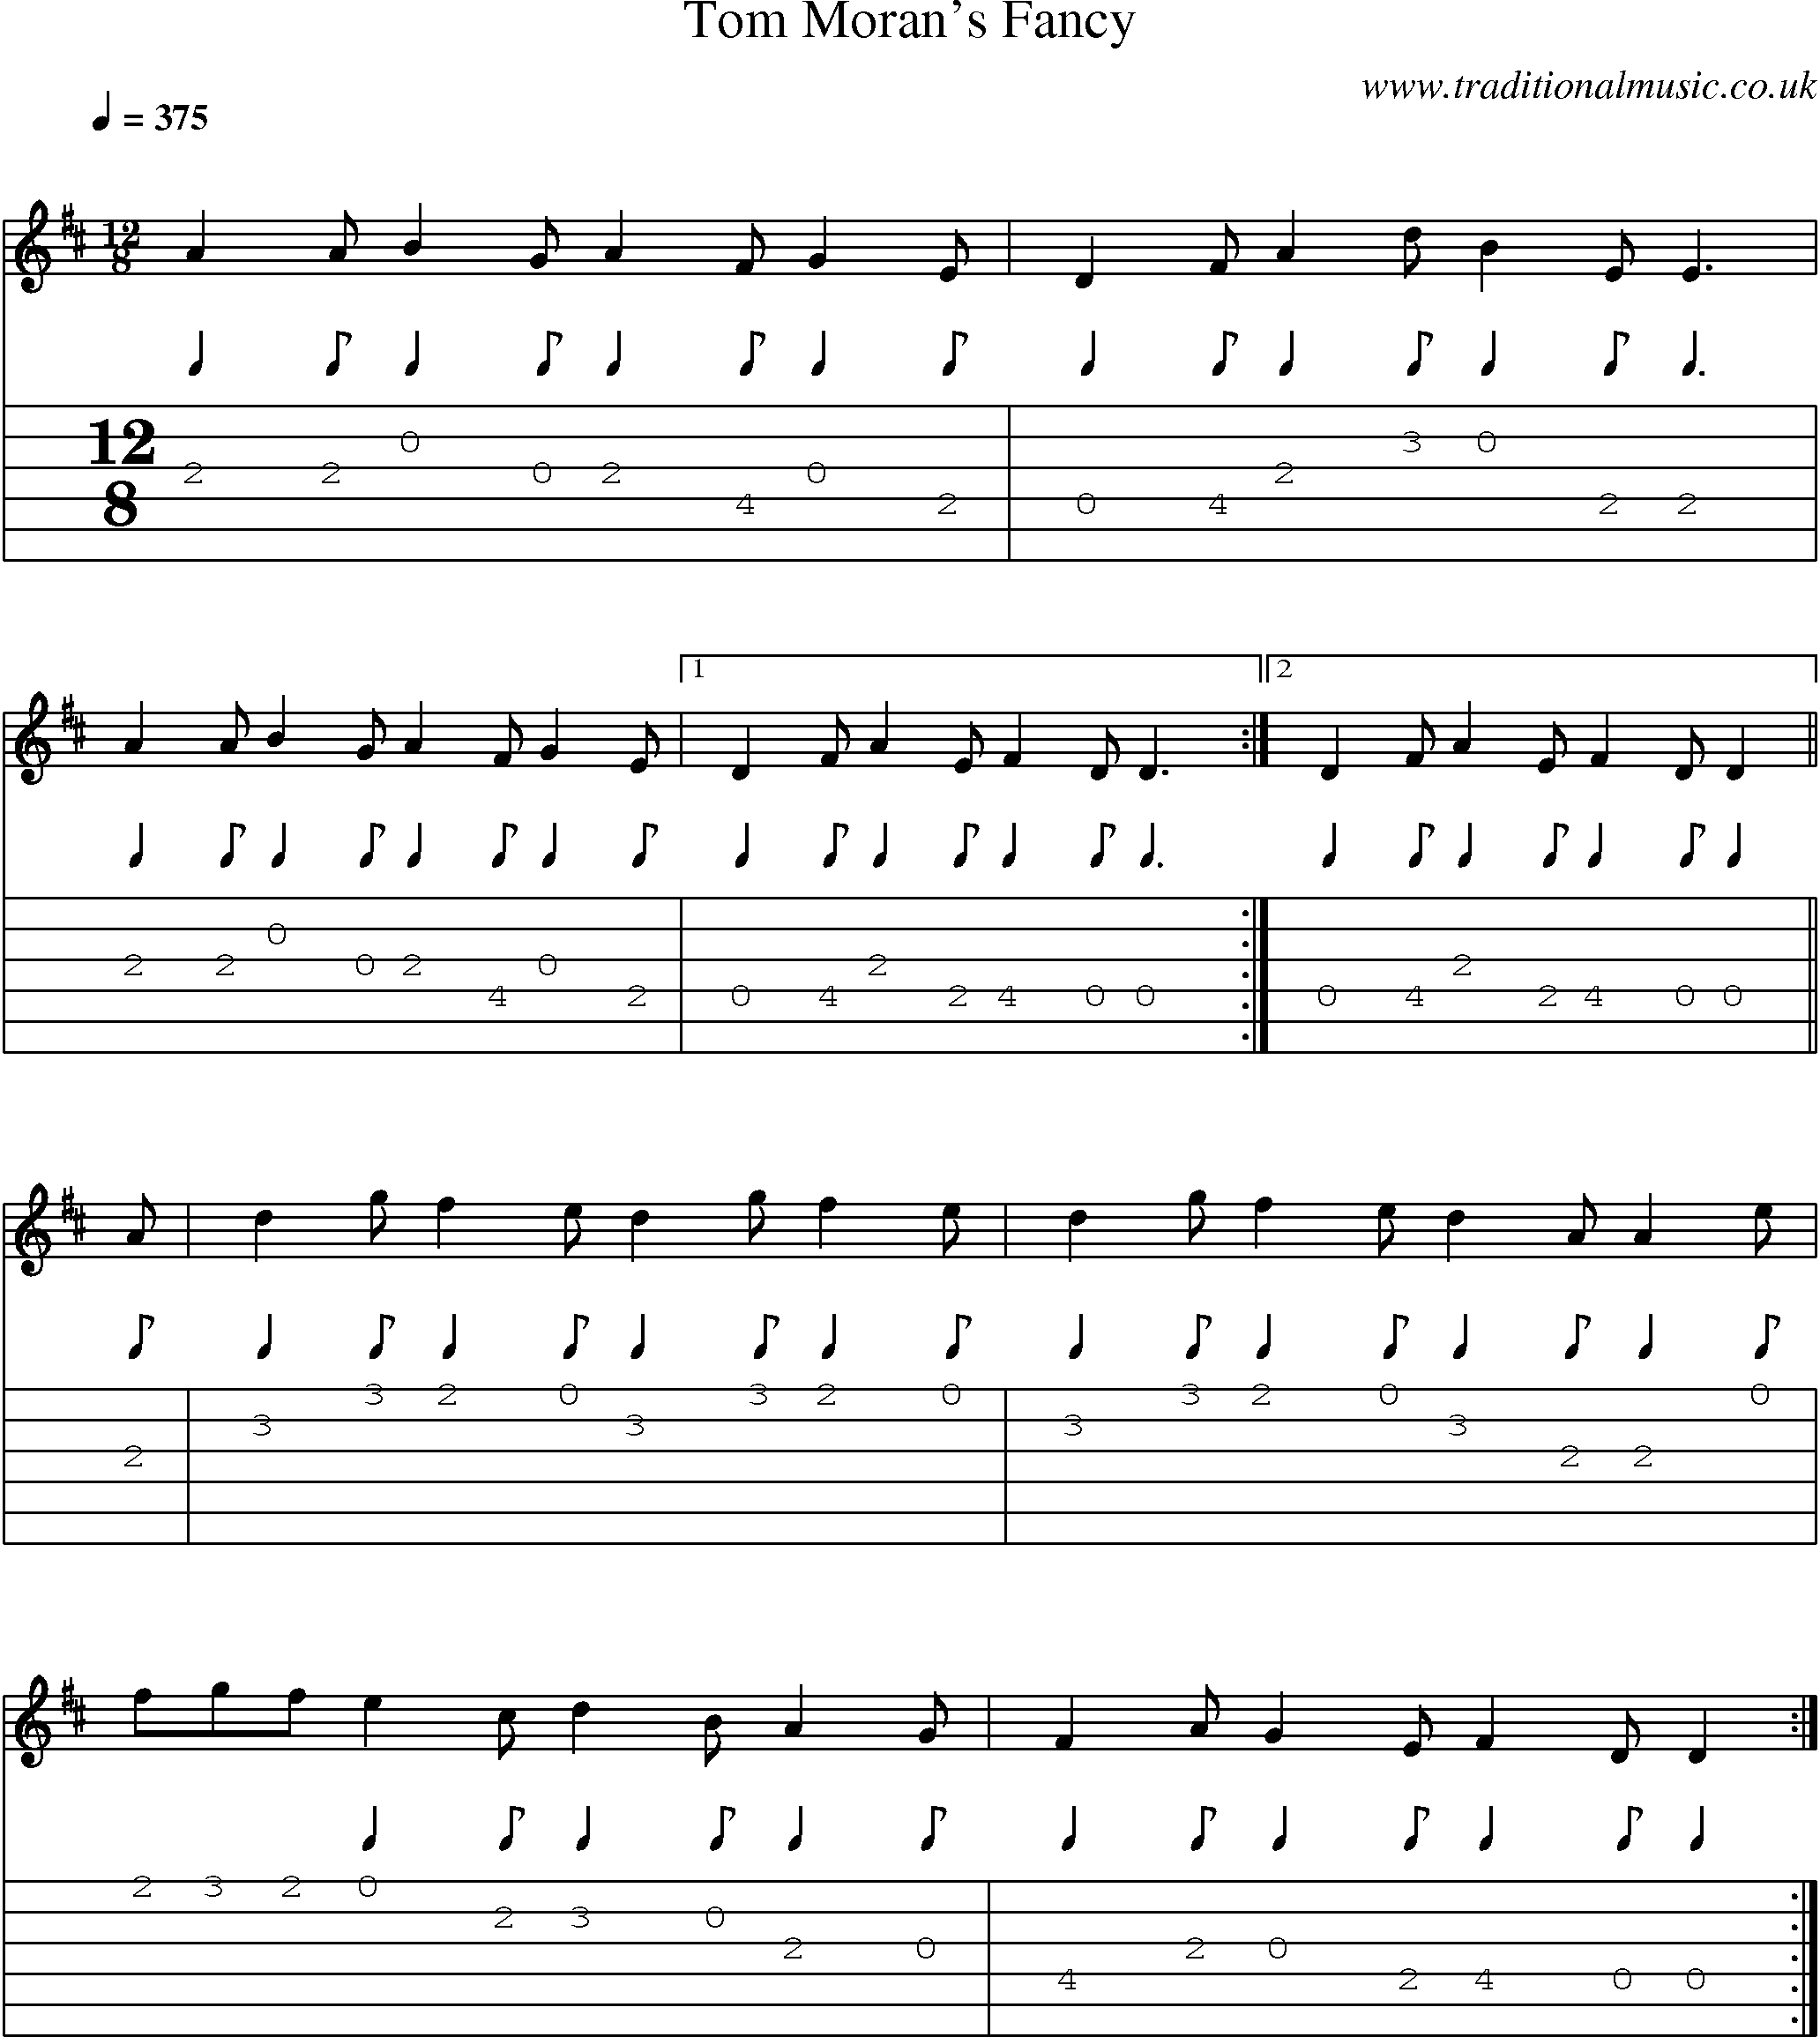 Music Score and Guitar Tabs for Tom Morans Fancy